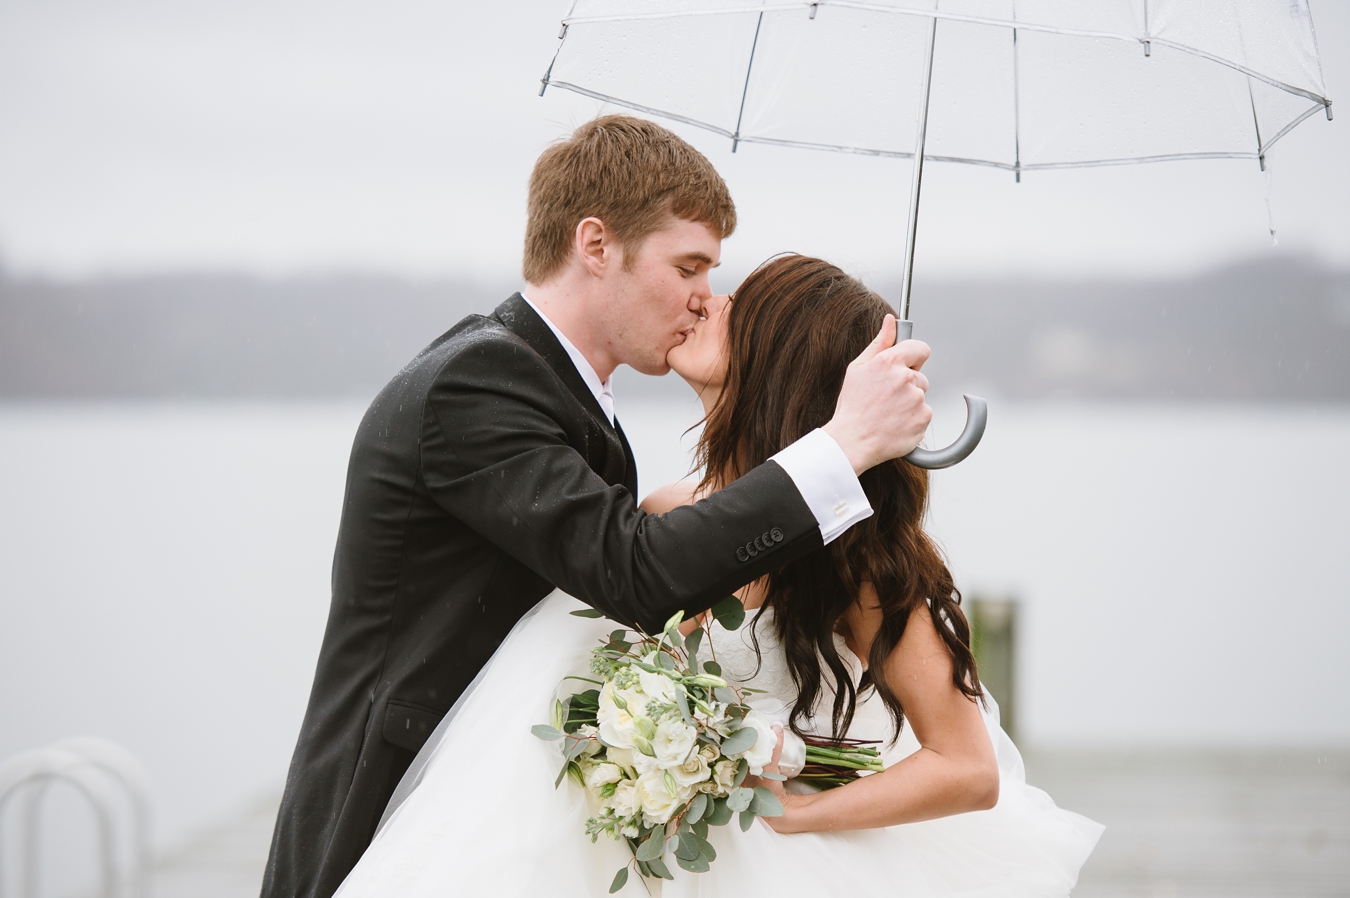 Rainy Day Sherwood Forest in Annapolis Wedding with Clear Umbrellas, Blush Bridesmaids Dresses, and Nautical Details | Natalie Franke Photography